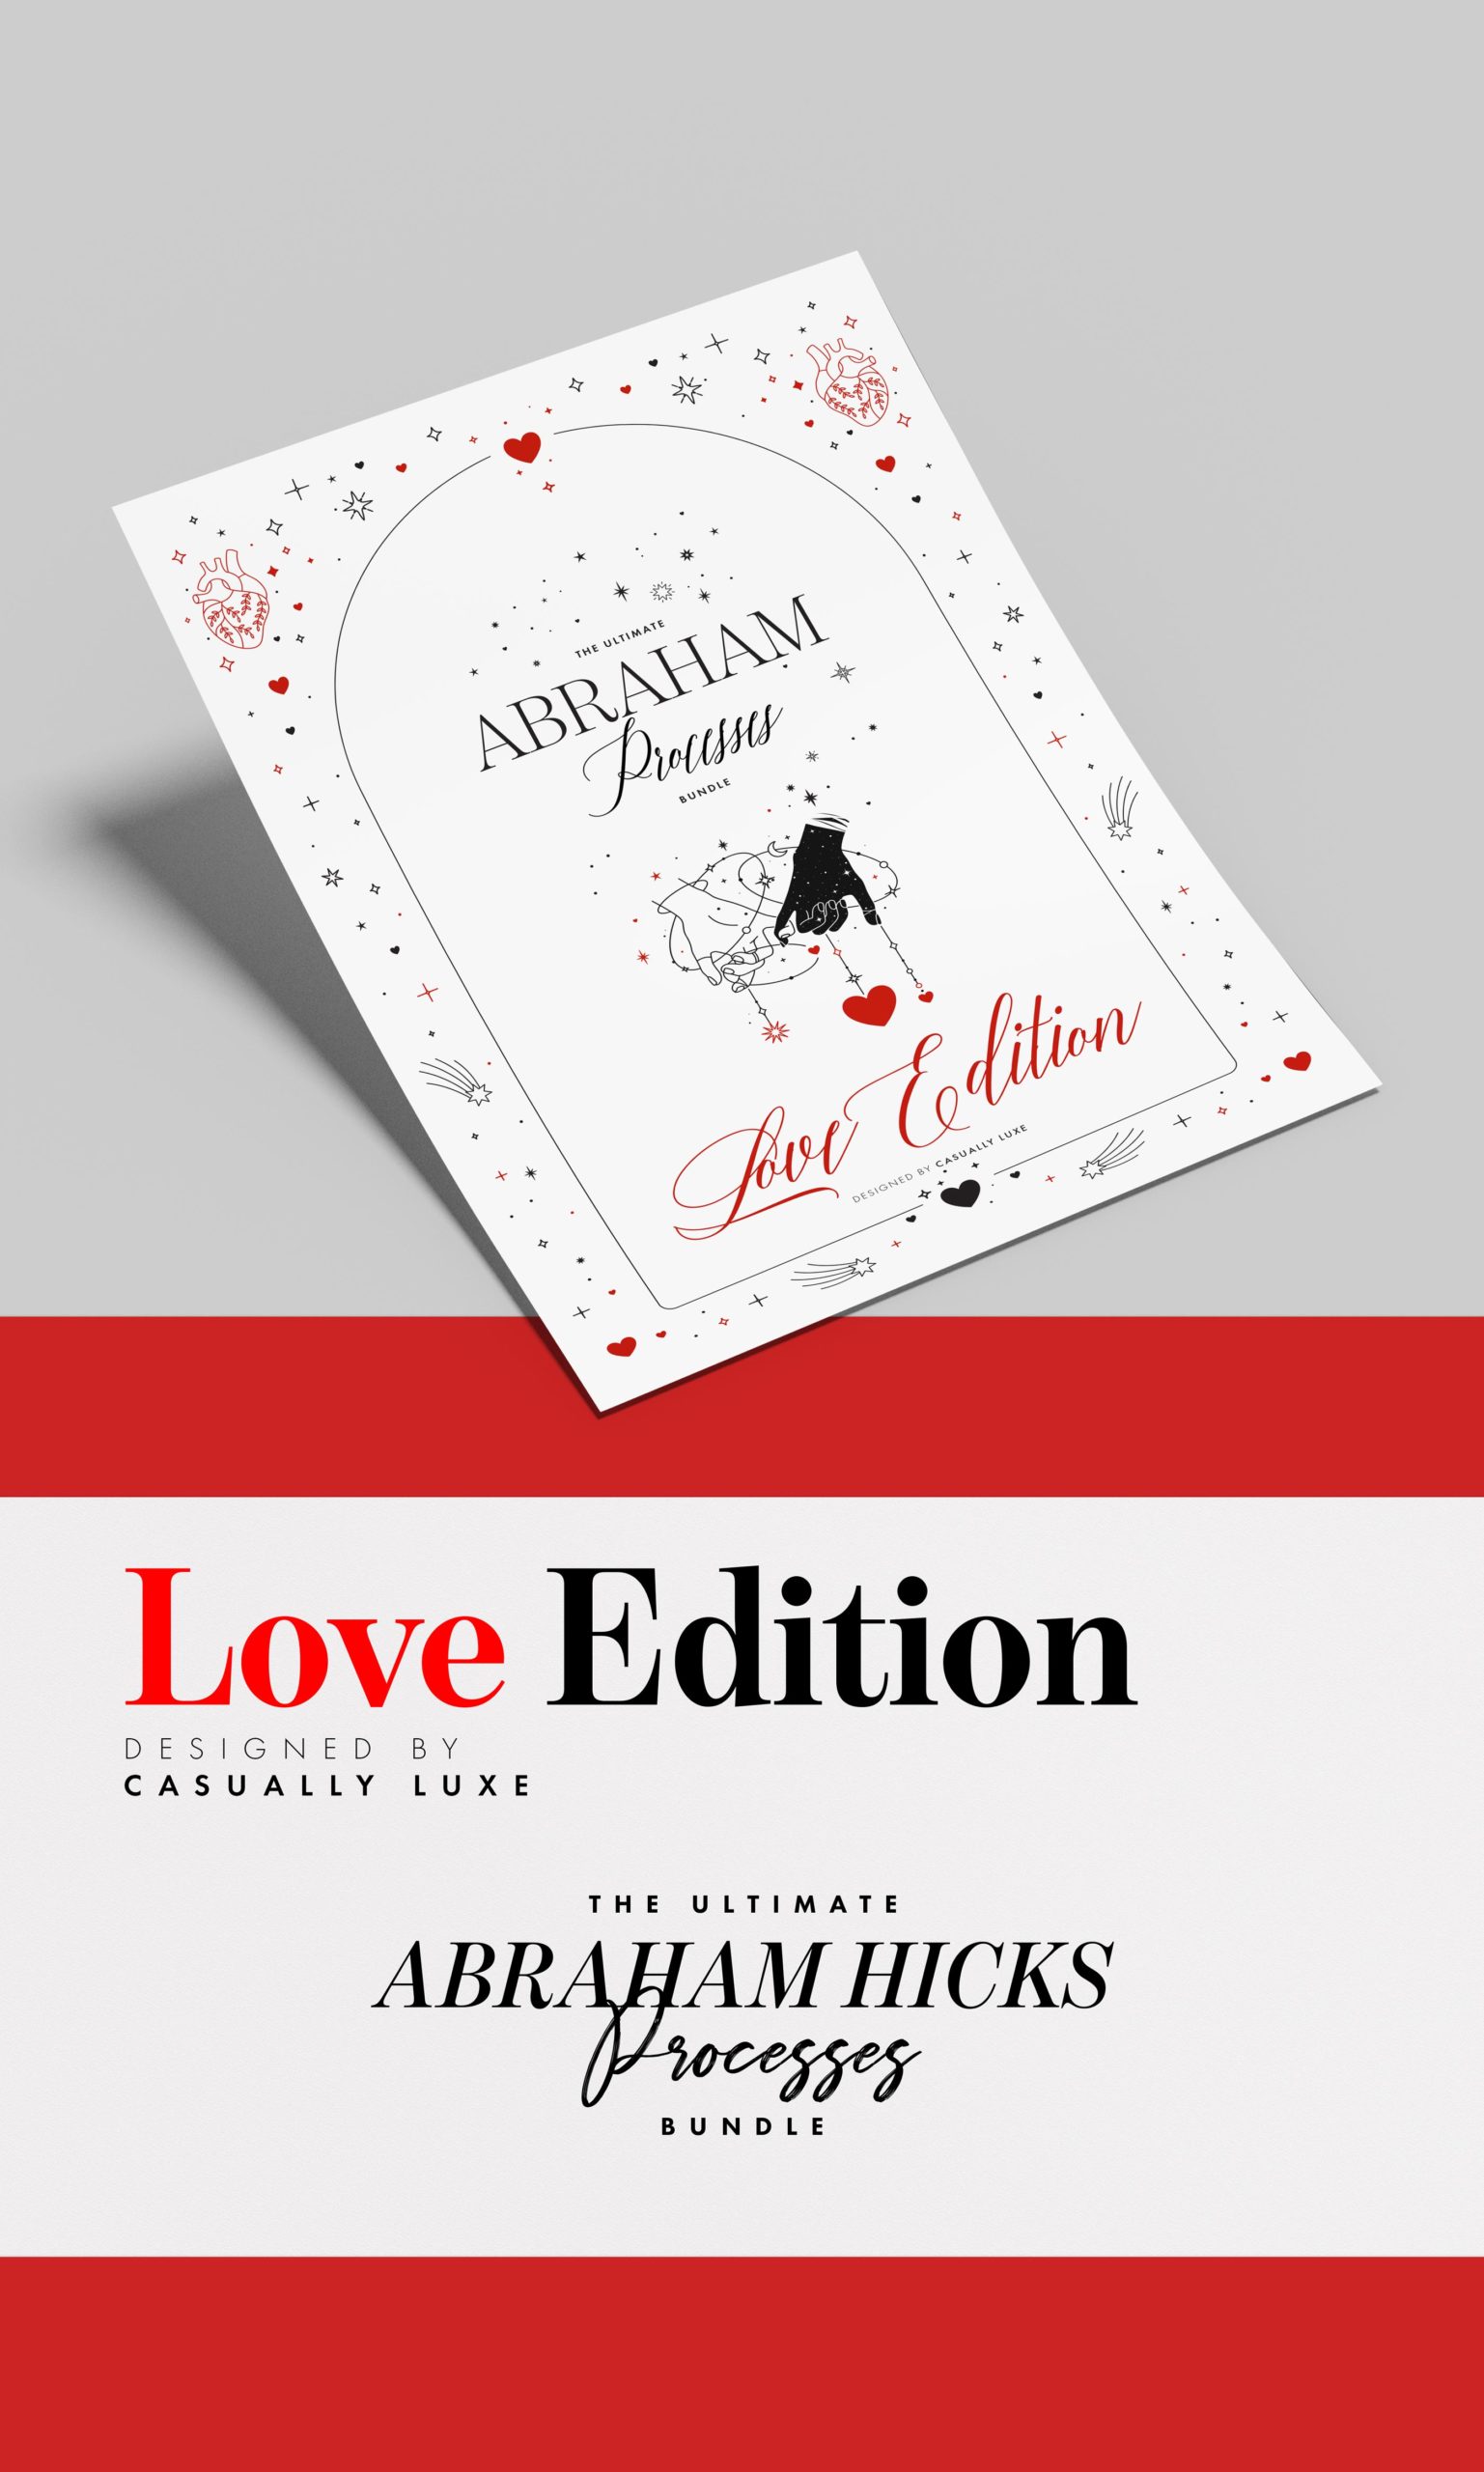 LOA Journal Bundle by Casually Luxe - Love Edition